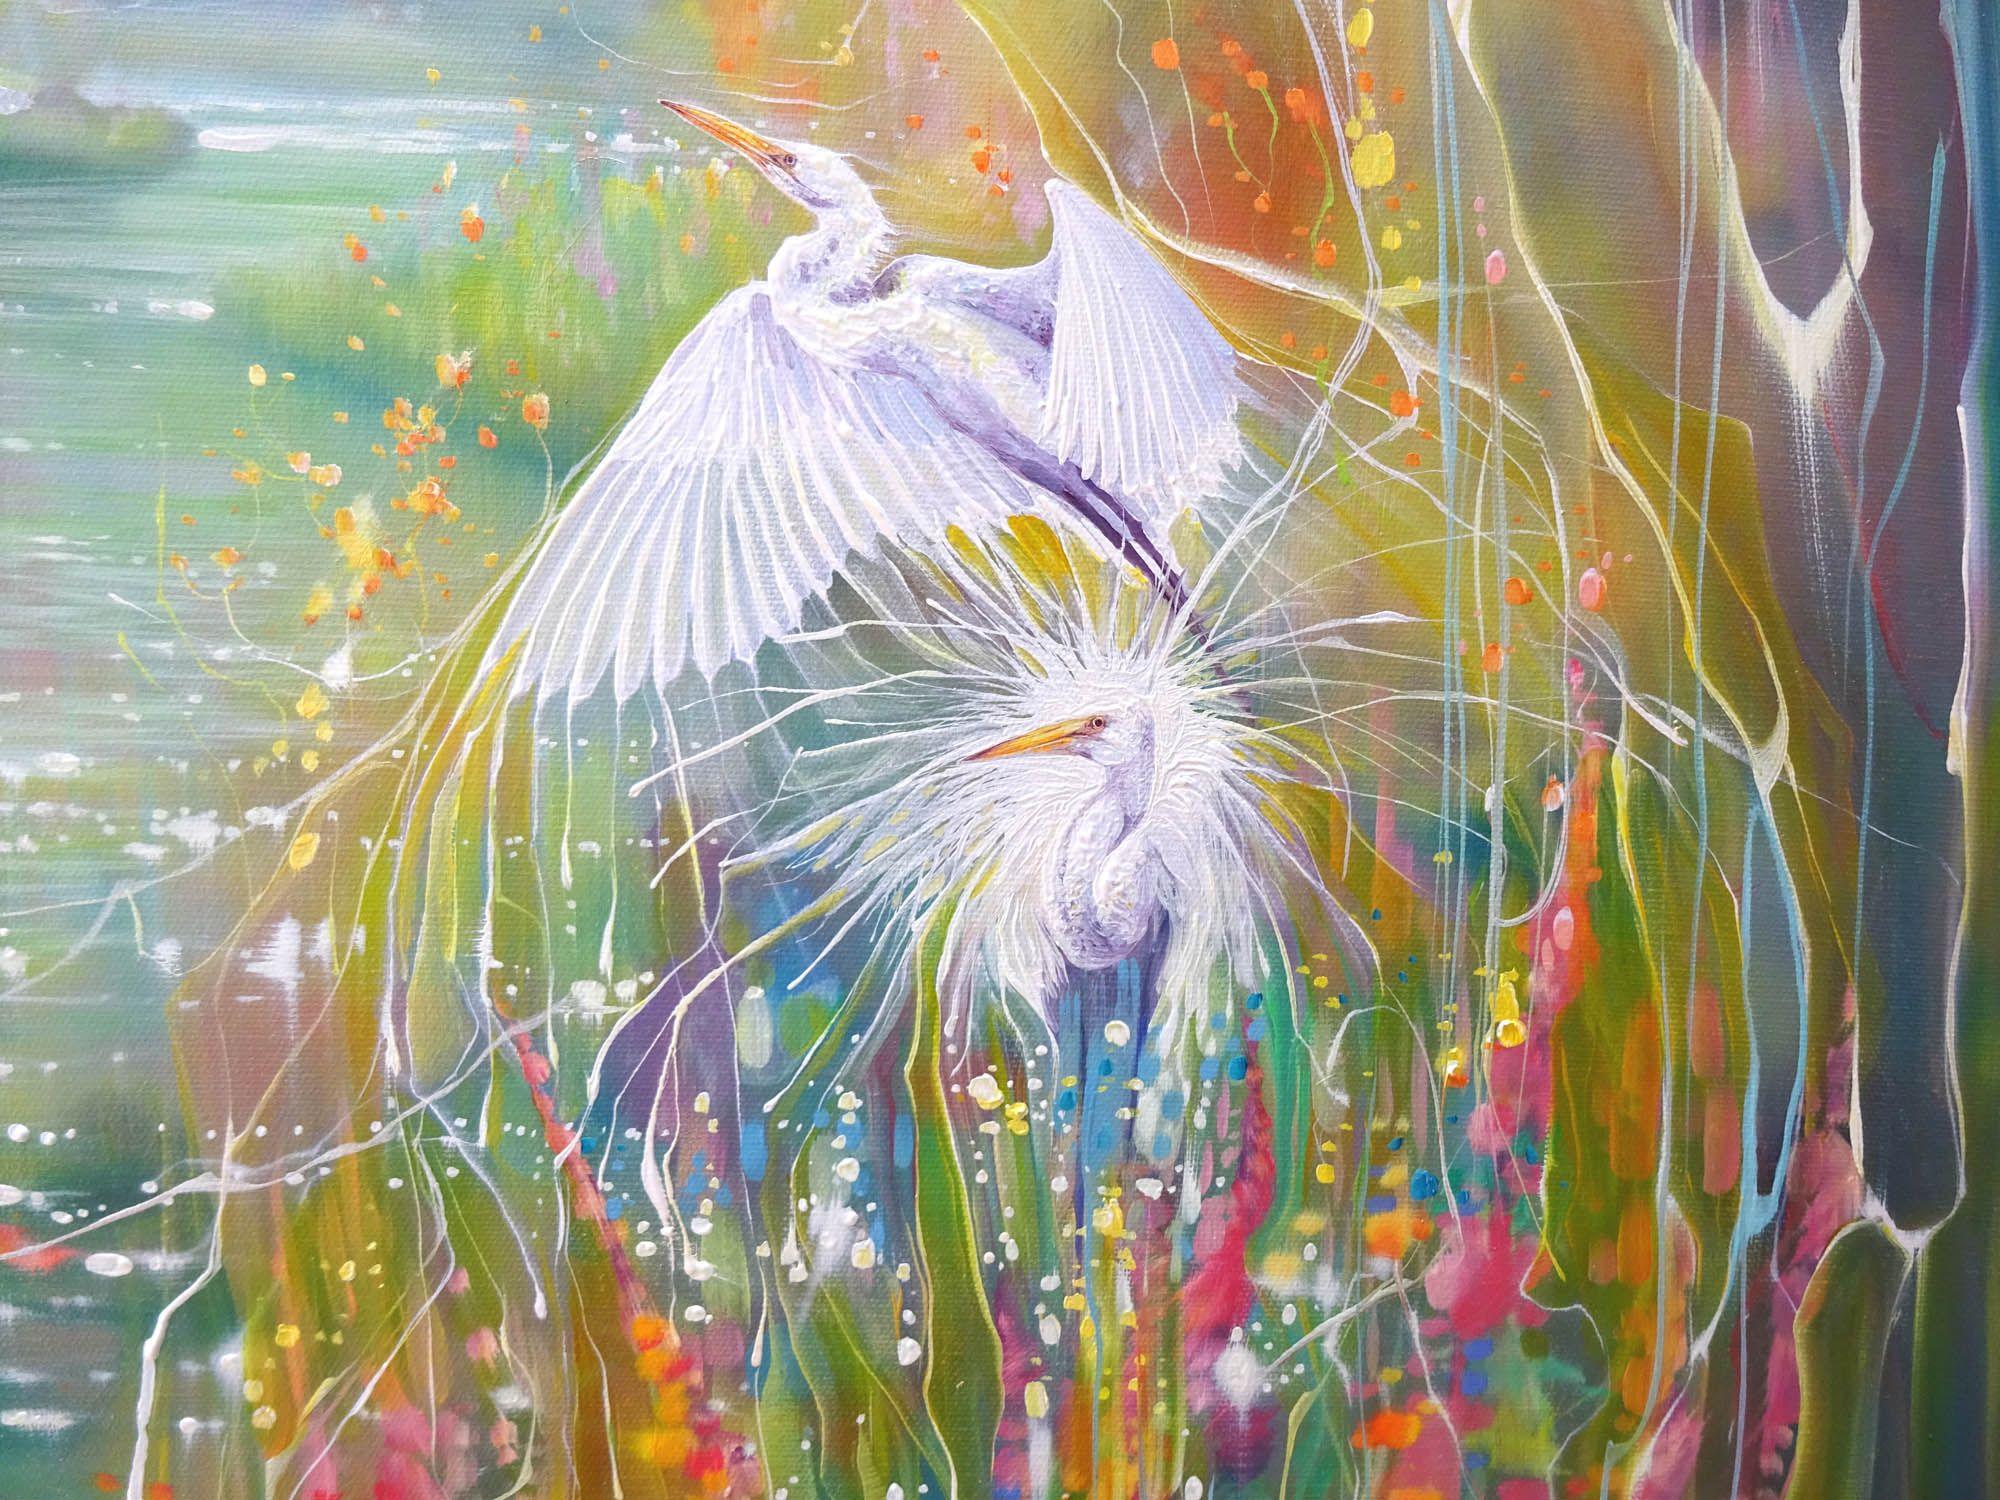 Through the Veil is a large contemporary oil painting of a river bank in summer with wildflowers and white egrets. It is 40x40x1.5 inches. This painting was inspired by a recent river walk along the river Ouse near Newick. It shows the river and